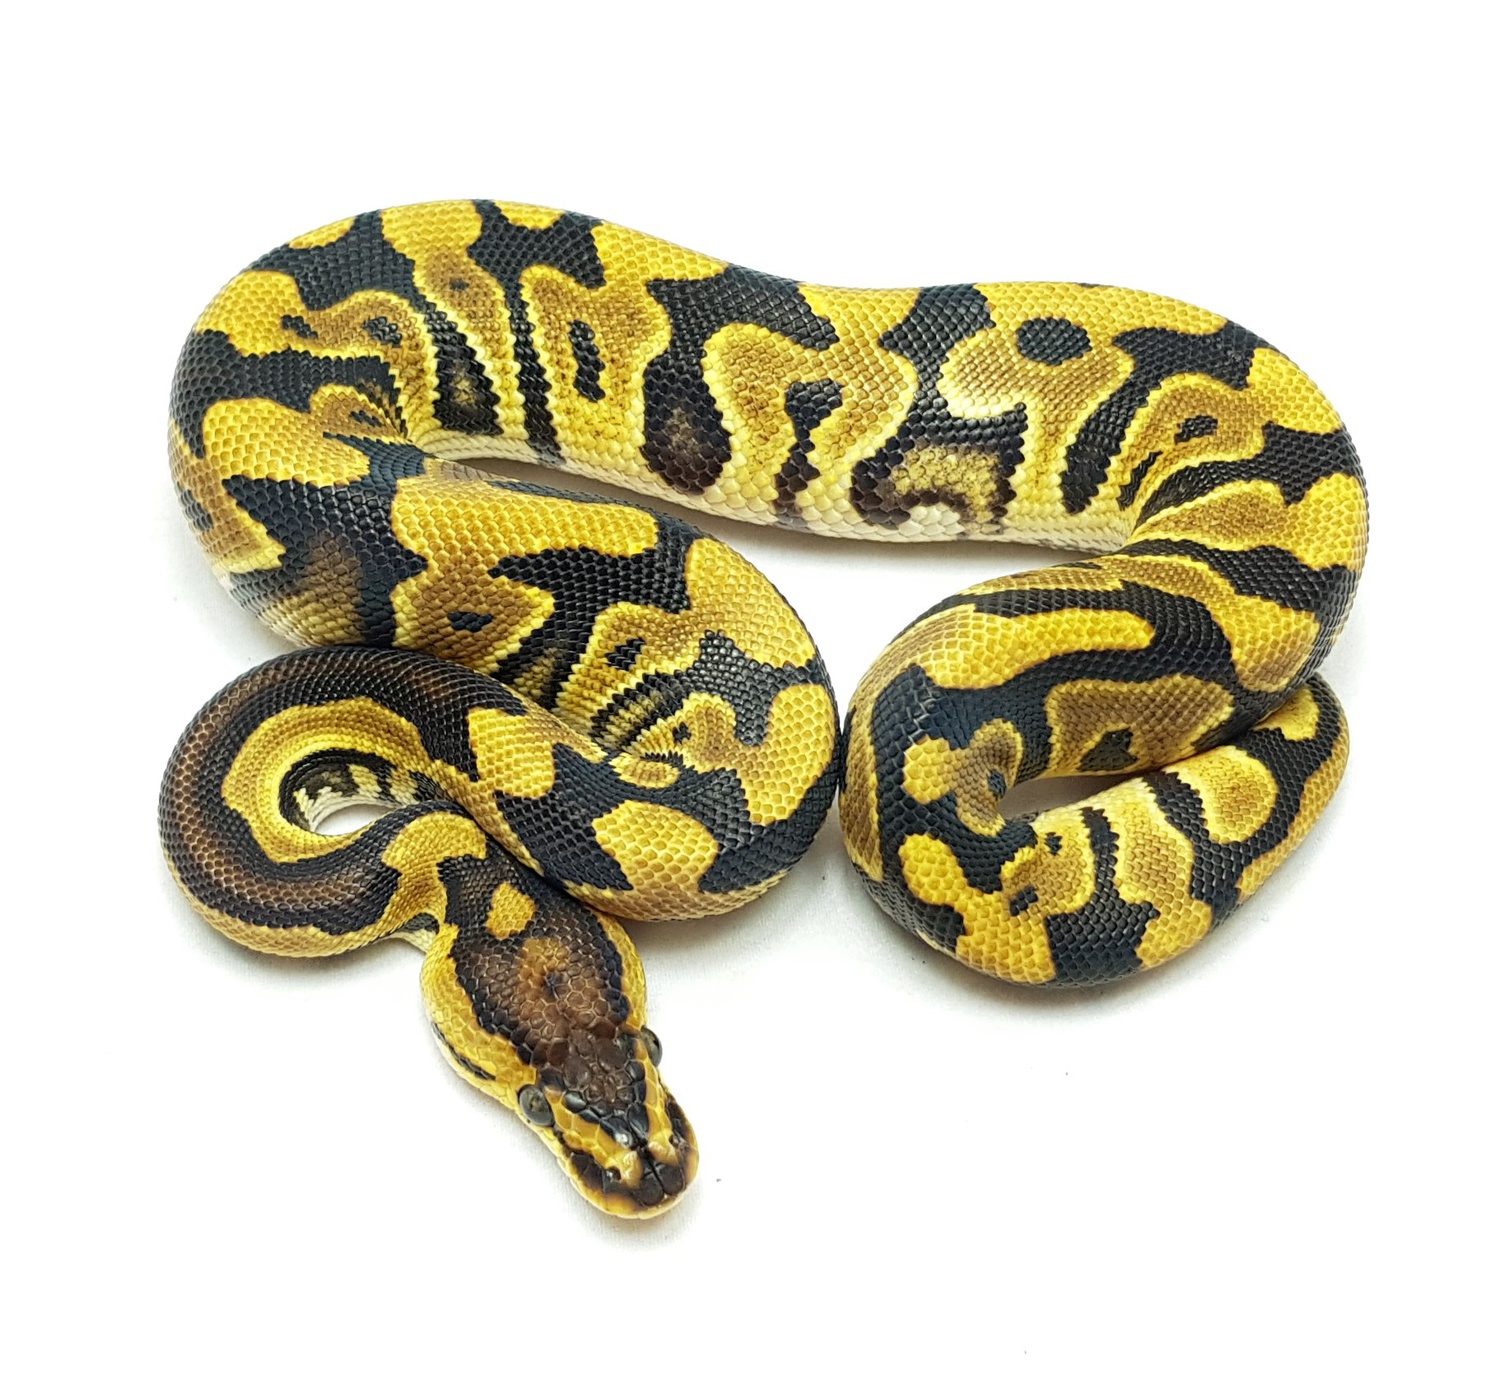 Clizmo Male Ball Python by Belgian Designer Morphs